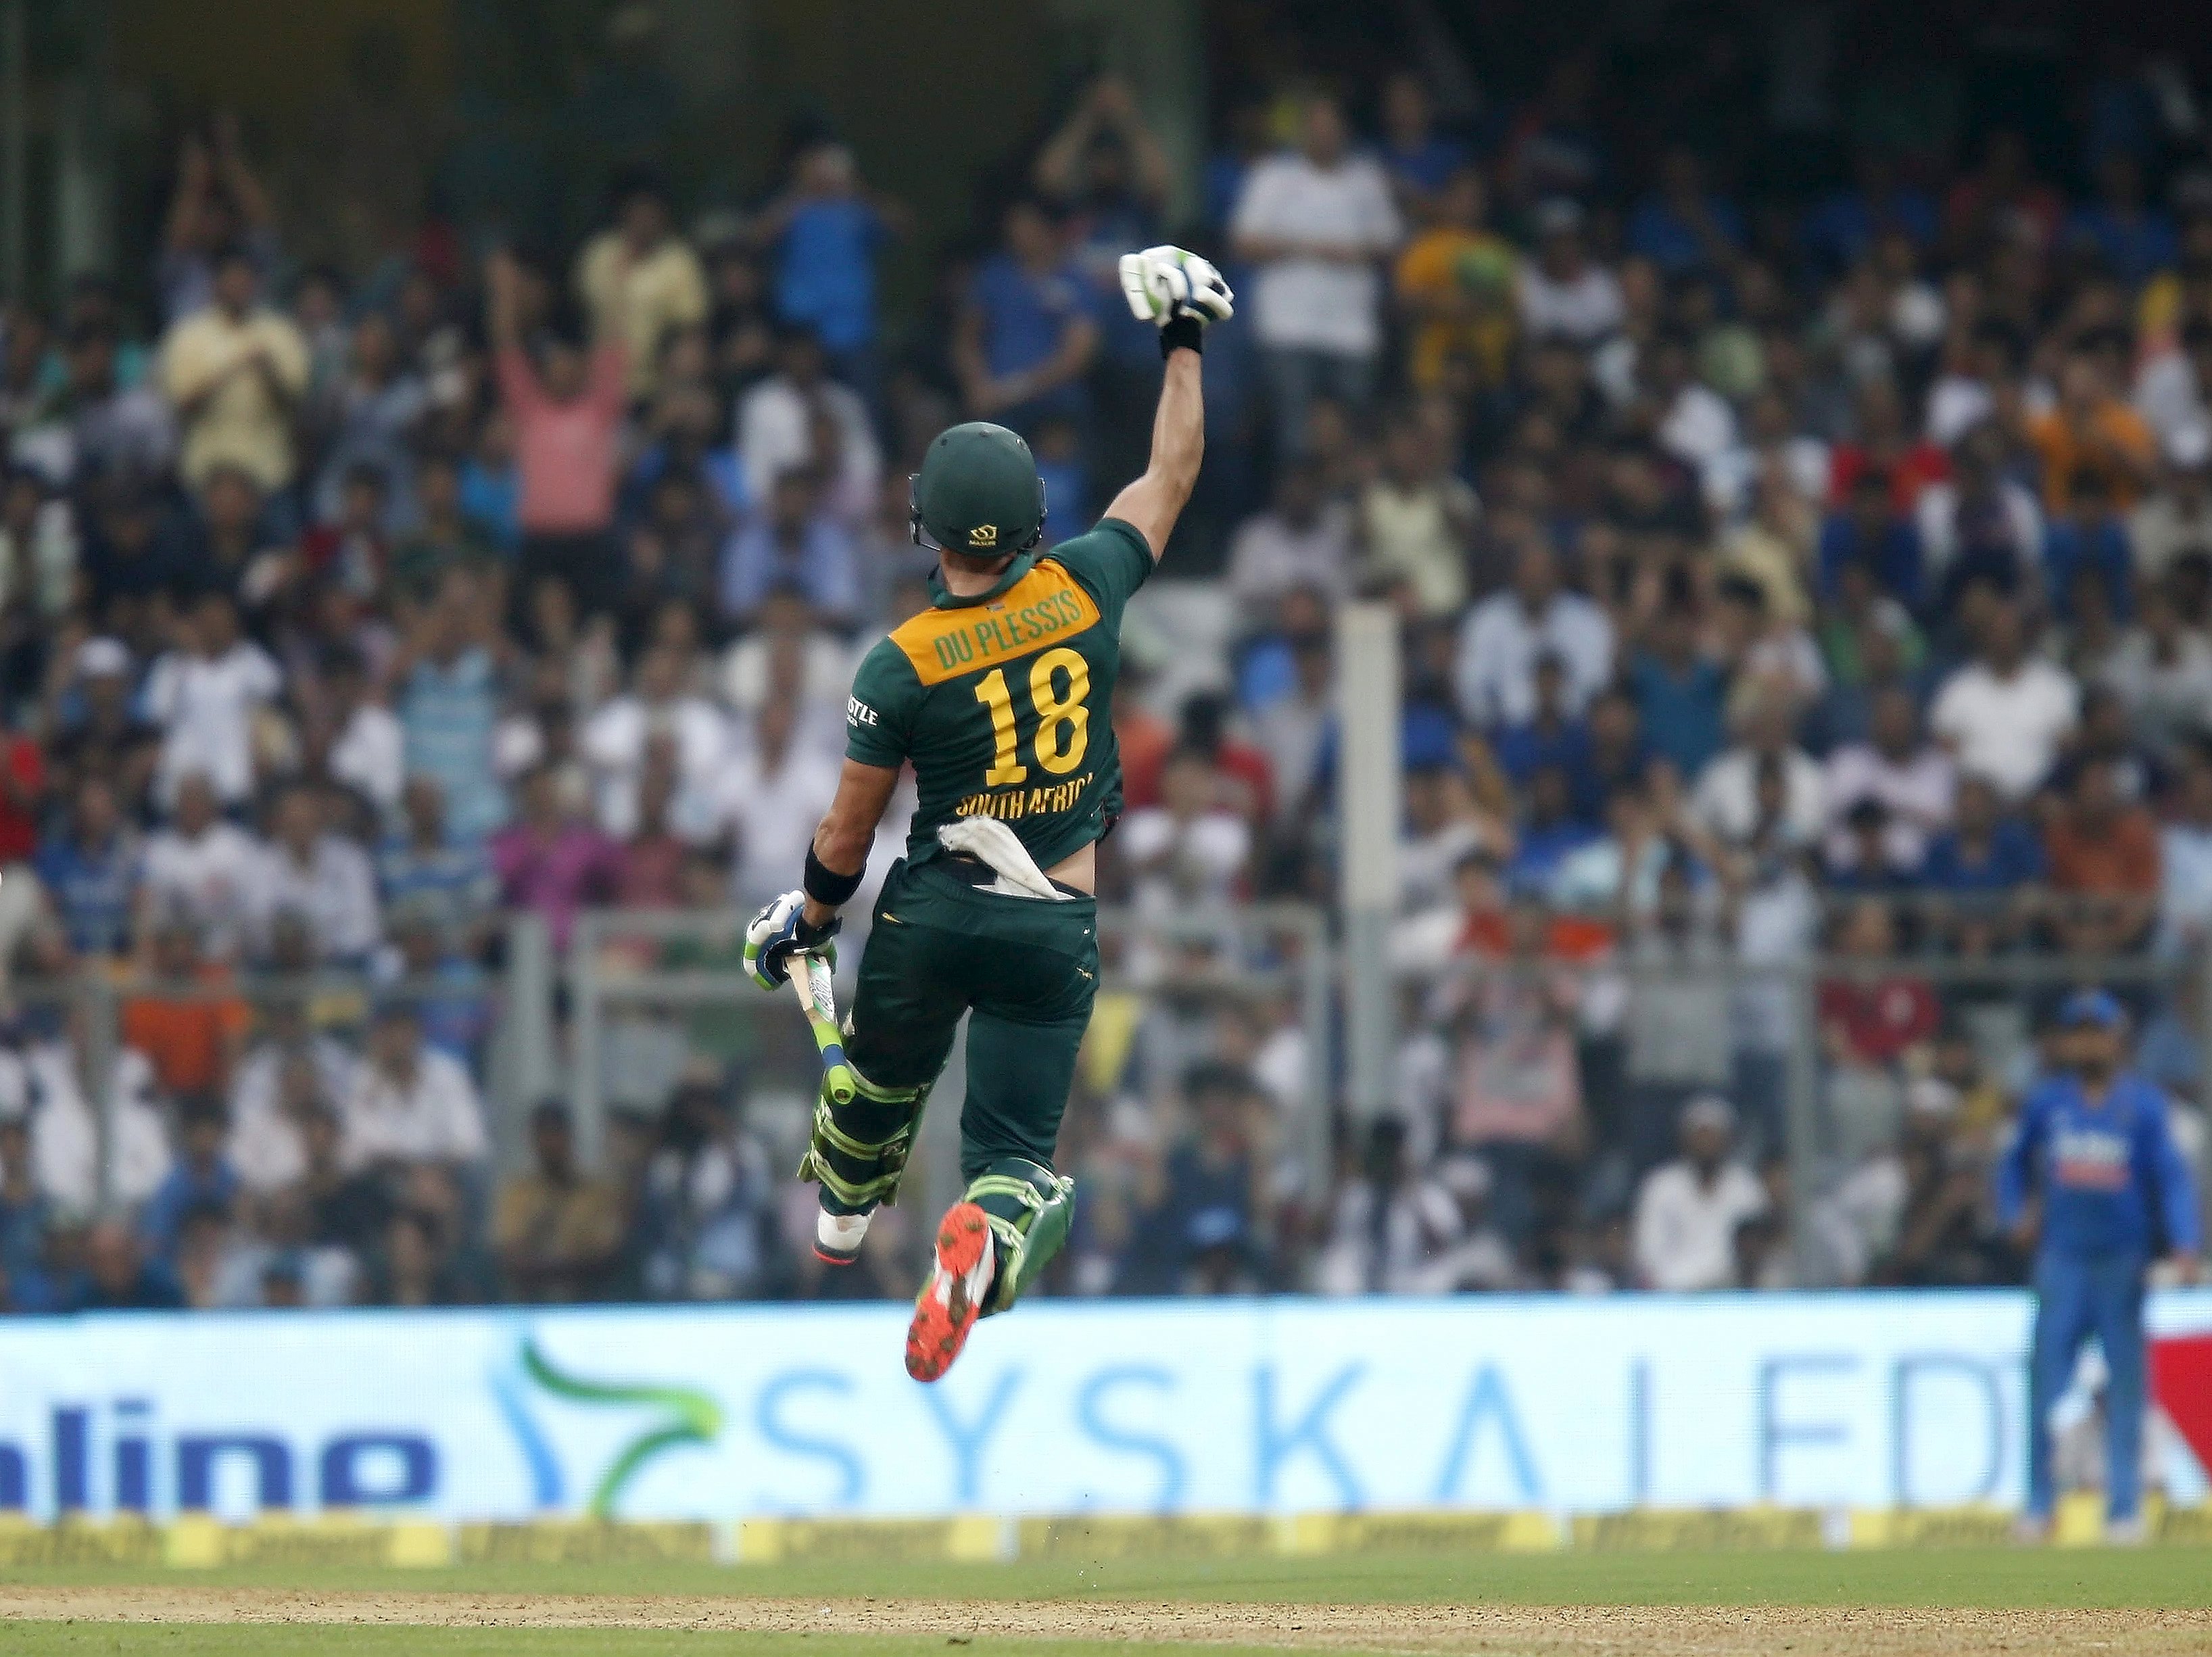 South Africa's Faf du Plessis leaps in the air as he celebrates scoring his century during their fifth and final one-day international cricket match against India in Mumbai, India, October 25, 2015. Photo: Reuters